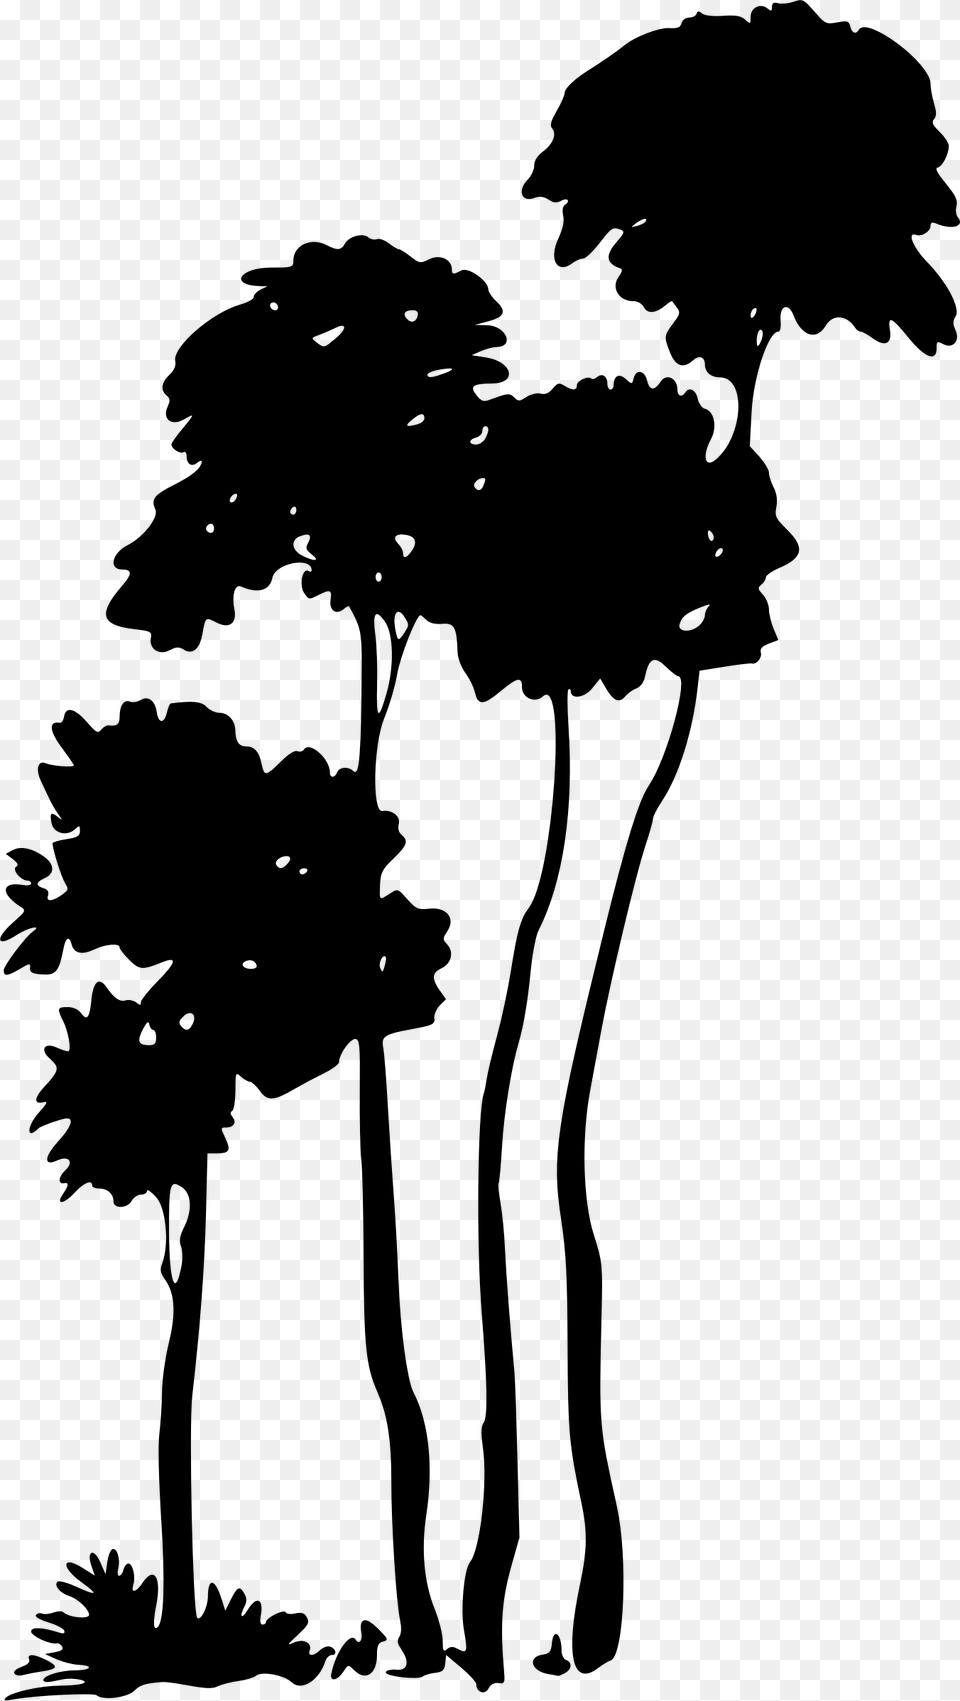 Trees Silhouette Clip Arts Arthur Rackham Fairy Silhouettes, Gray Free Png Download